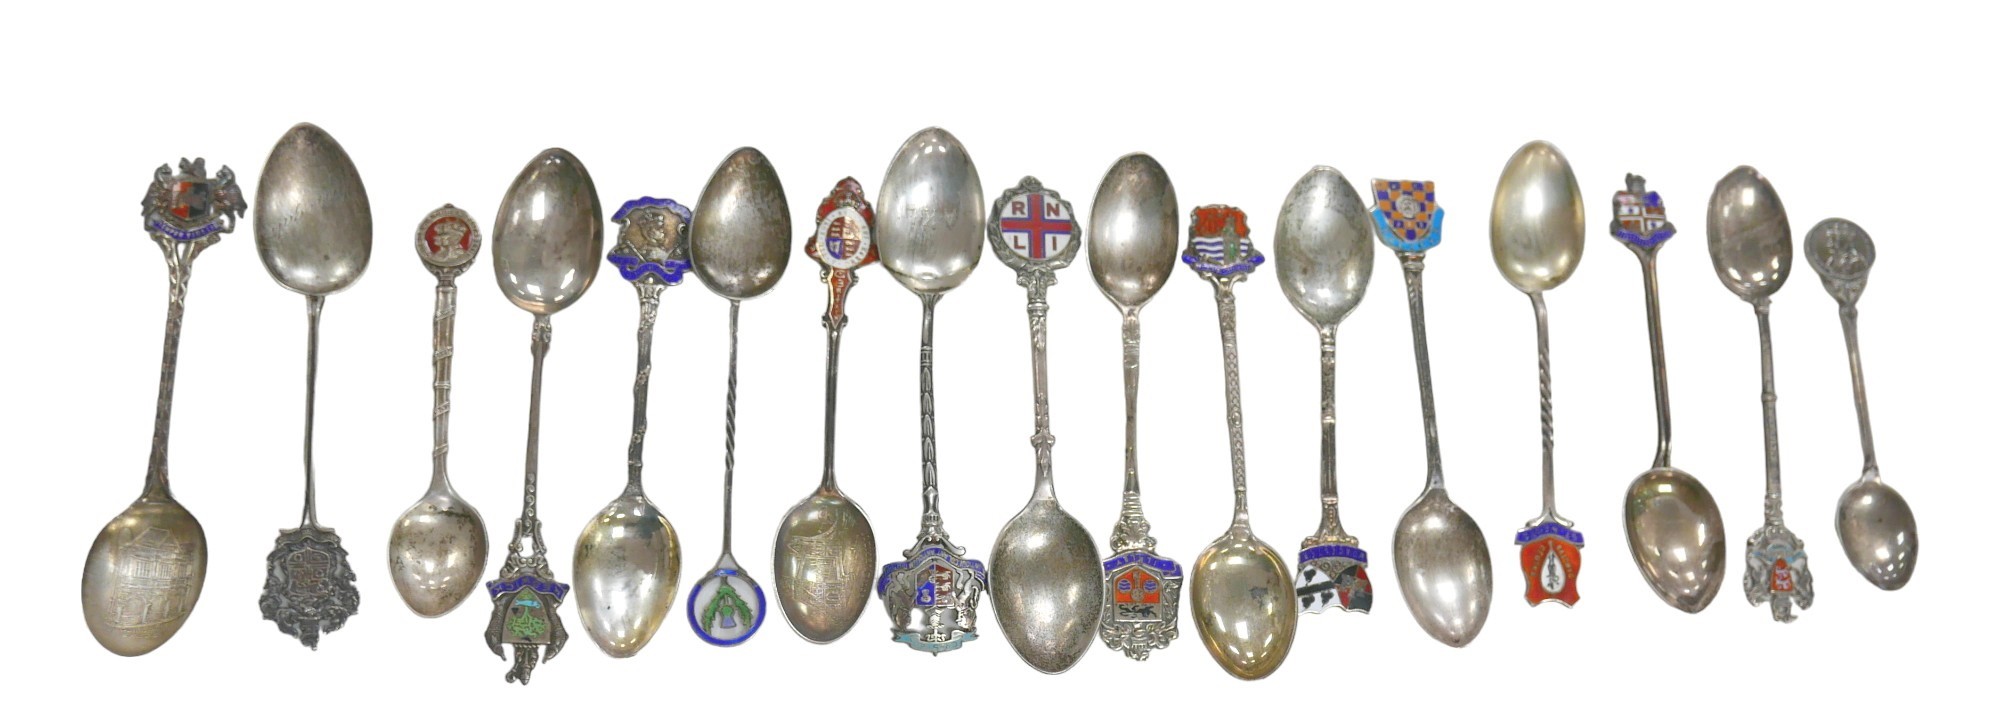 A cased collection of silver and silver plated commemorative teaspoons, approximately 7.2toz of - Image 2 of 2